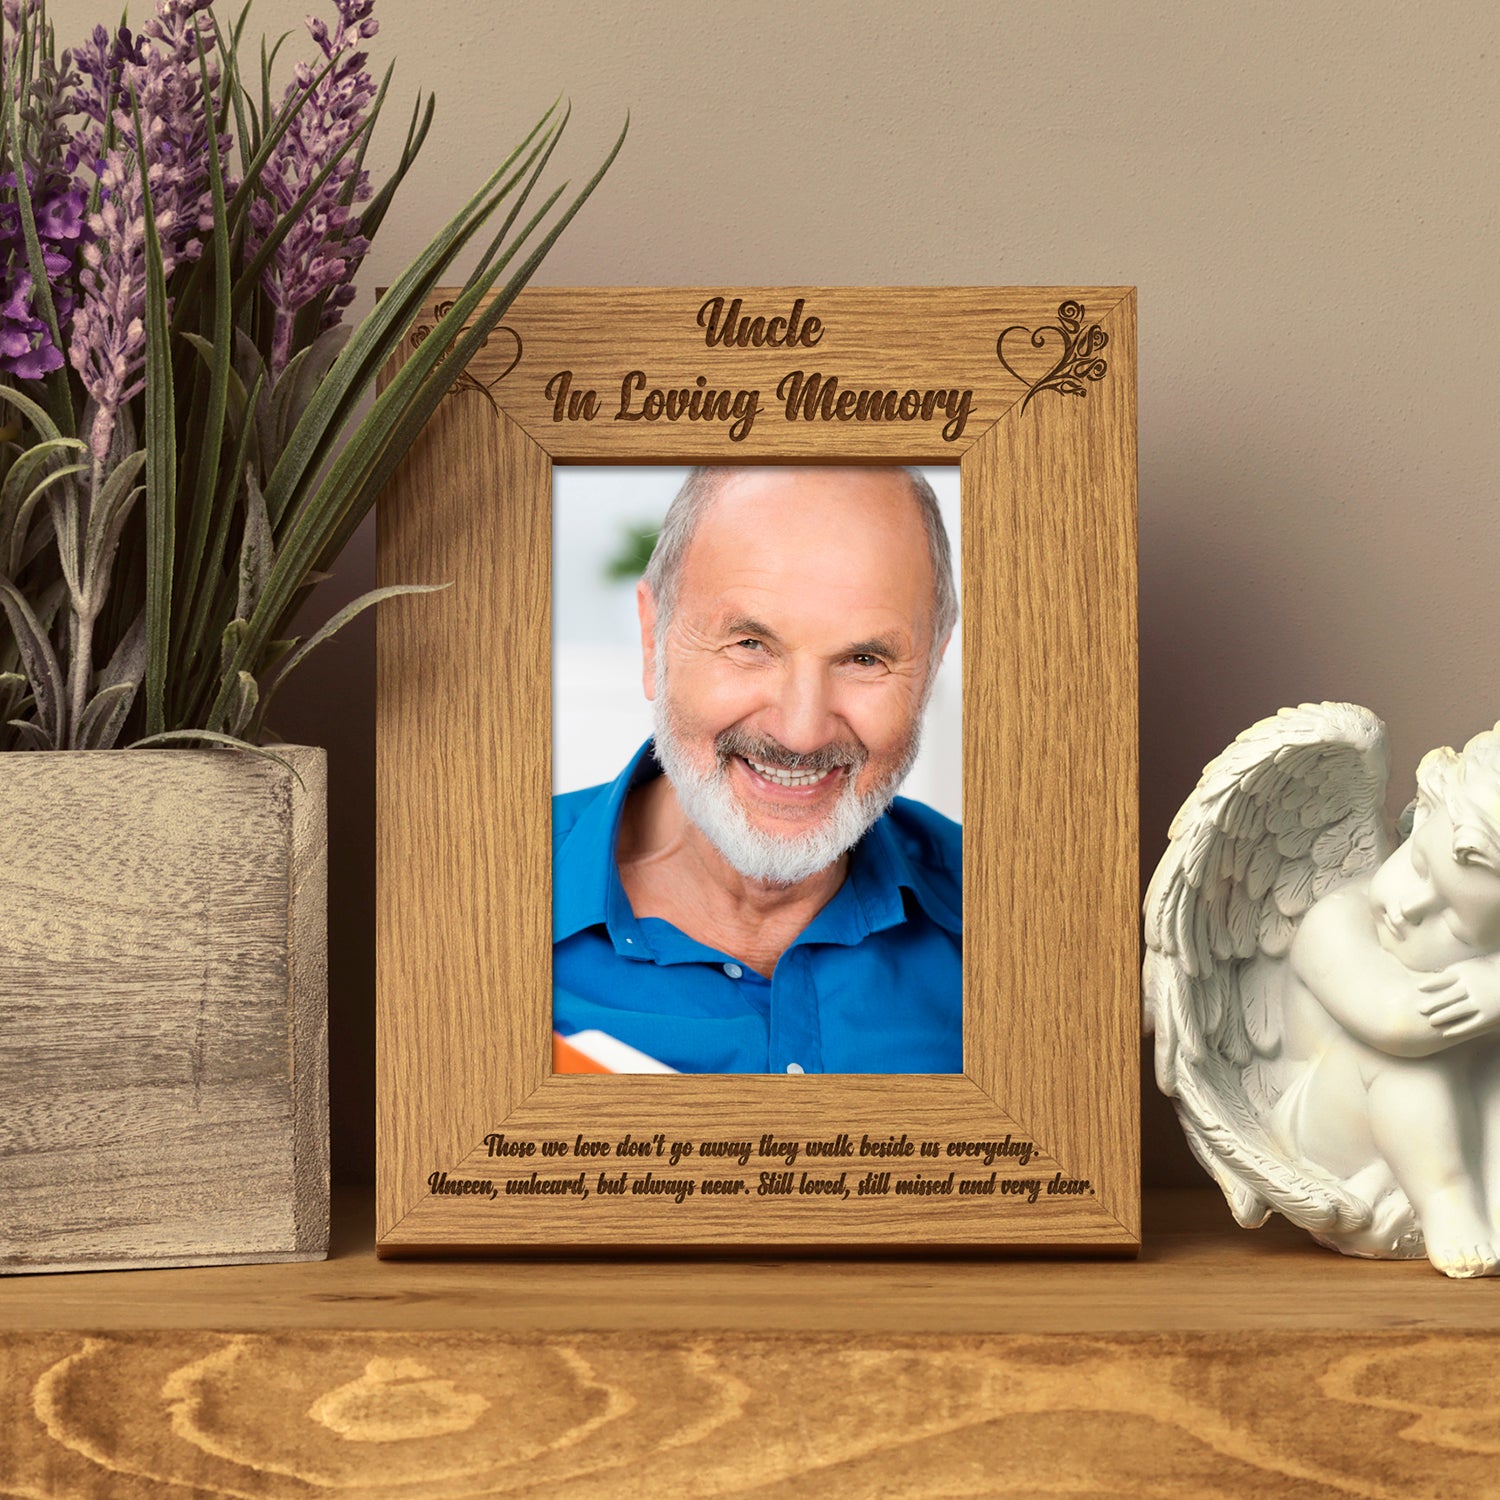 Uncle In Loving Memory Remembrance Portrait Wooden Photo Frame Gift - ukgiftstoreonline